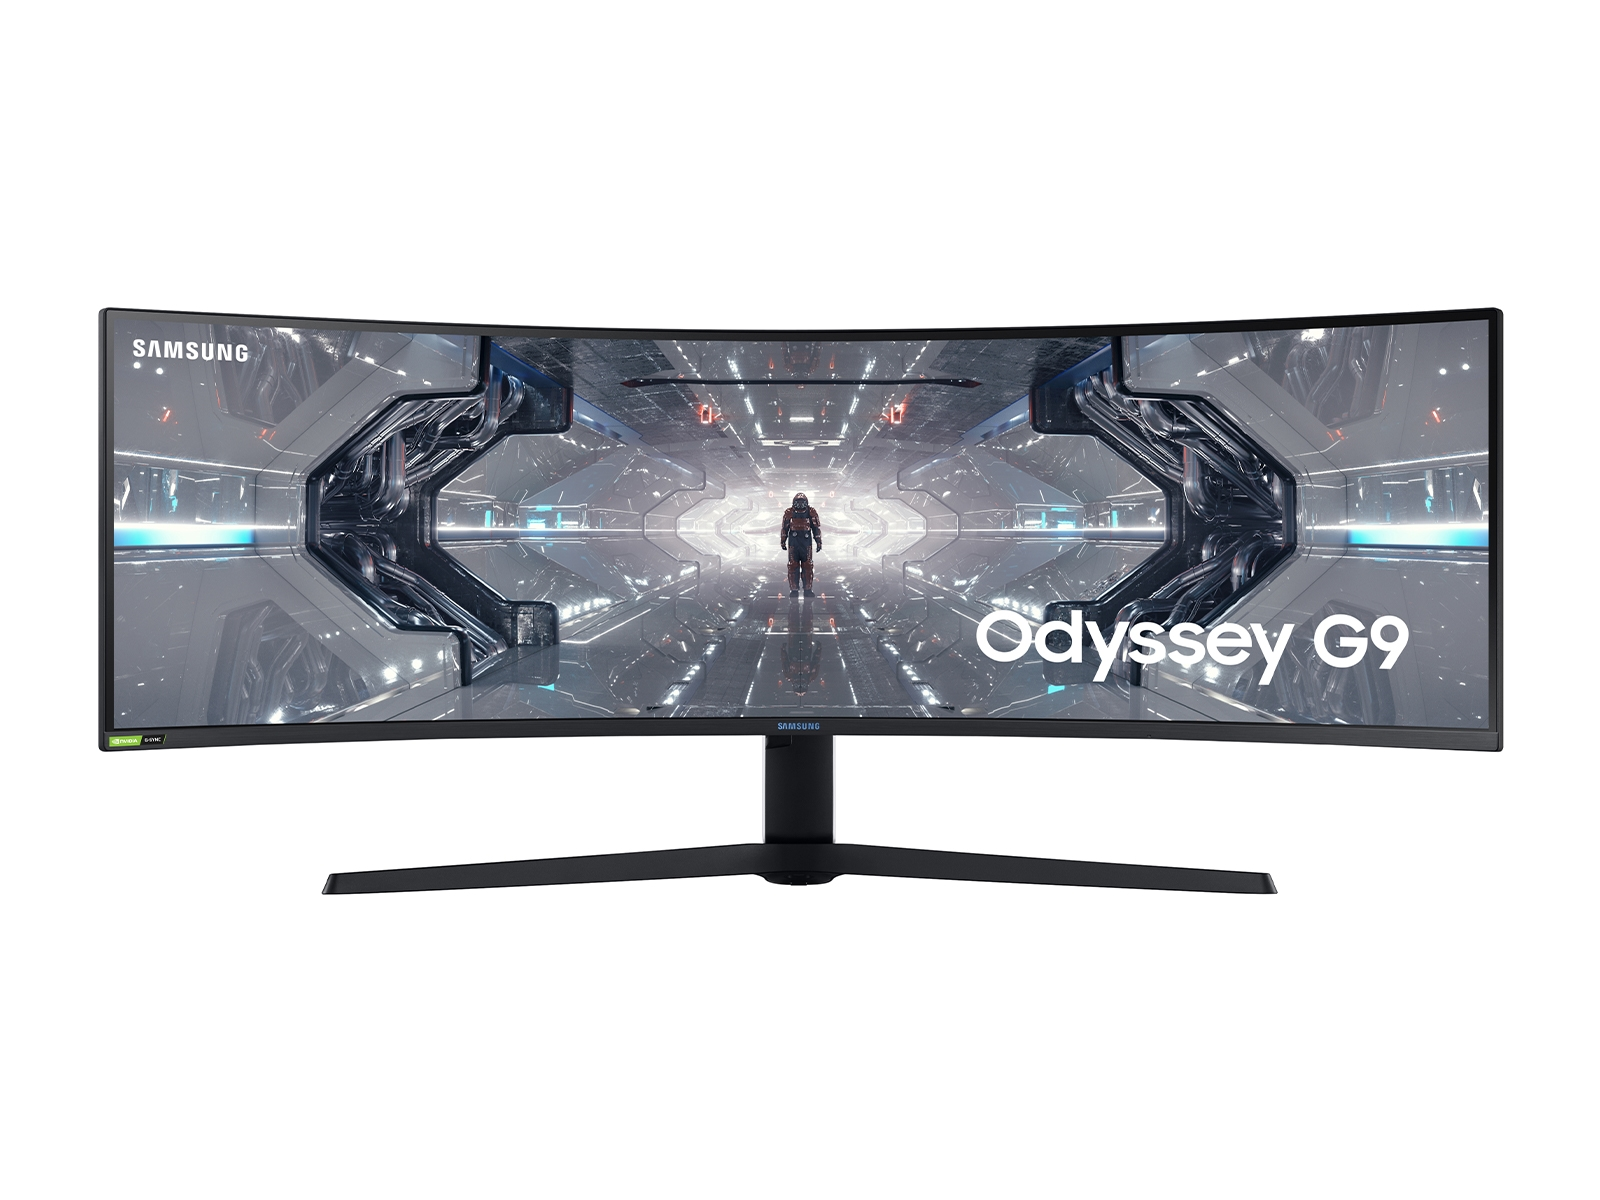 49" Odyssey G9 DQHD 240Hz 1ms G-Sync Compatible HDR1000 QLED Curved Gaming Monitor $1099